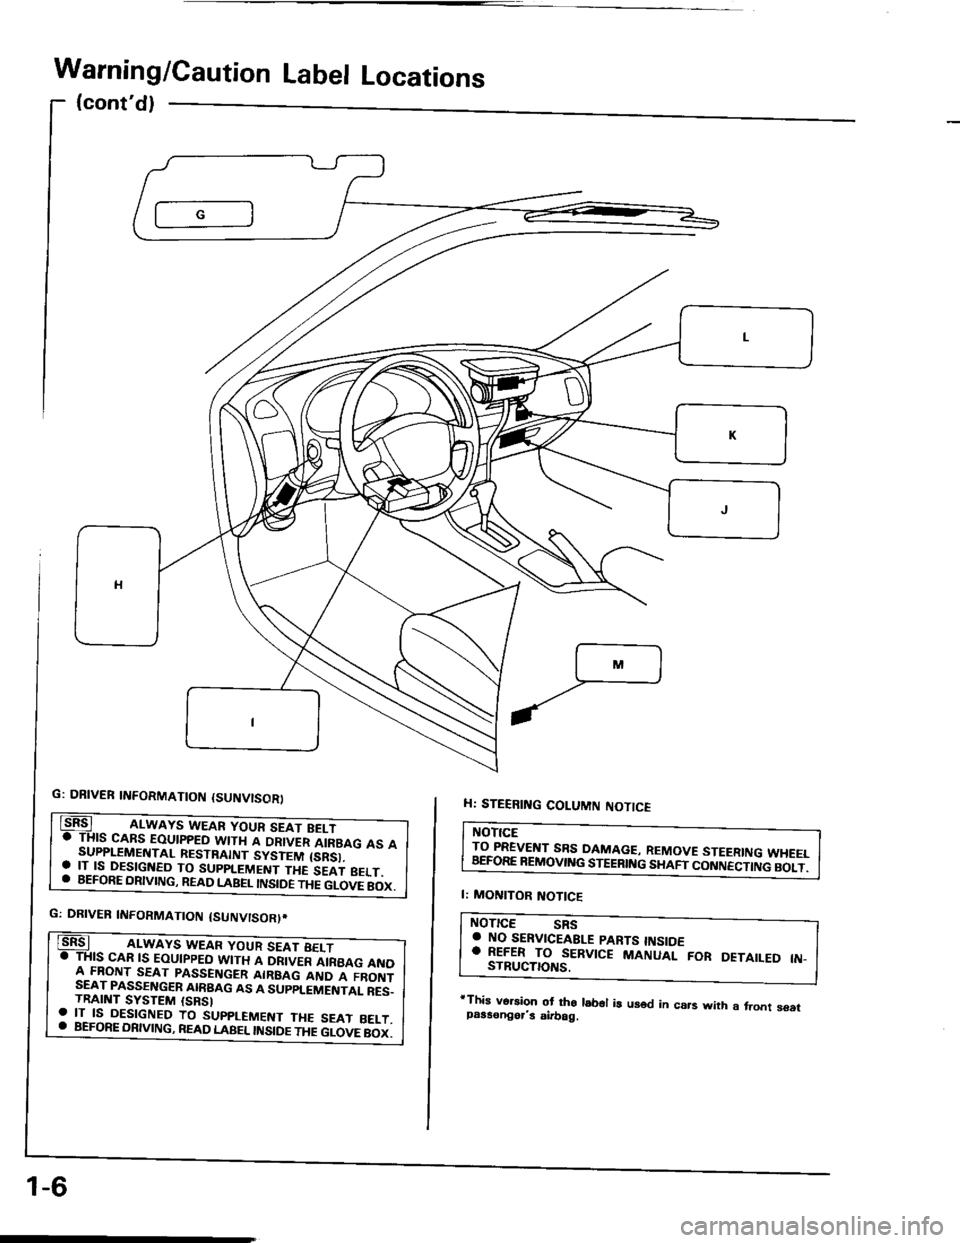 ACURA INTEGRA 1994  Service Repair Manual Warning/Caution Label Locations
(contd)
G: DBIVEB TNFORMATTON {SUNV|SORt
rThis vo.3ion ot tho lsb€l i! us6d in csrs wtth a,ront soatpaas€ngors airbag.
G: DBIVEB INFORMATTON {SUNvtSORt.
. BEFoRE 